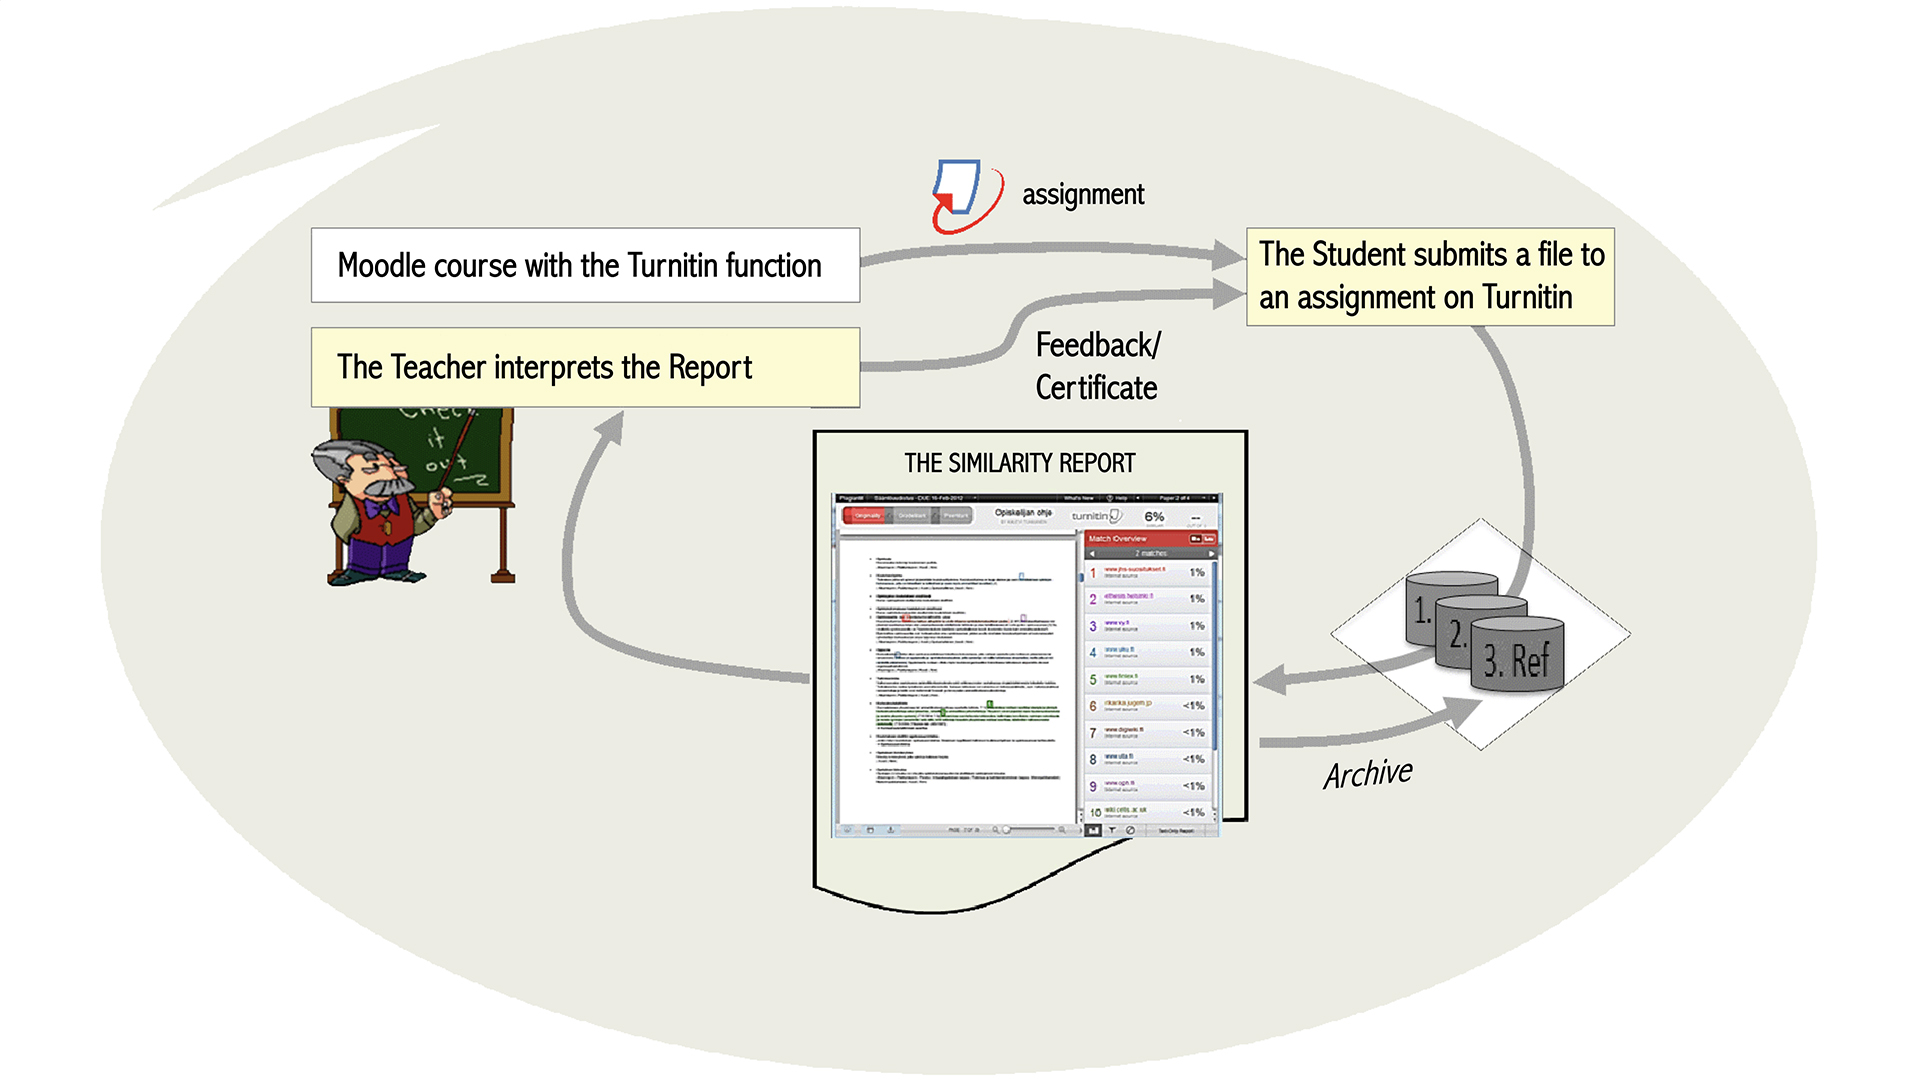 Turnitin process: The Teacher’s Moodle course with the Turnitin function, The student submits a file to an assignment on Turnitin, The similarity report, The Teacher interprets the Report.